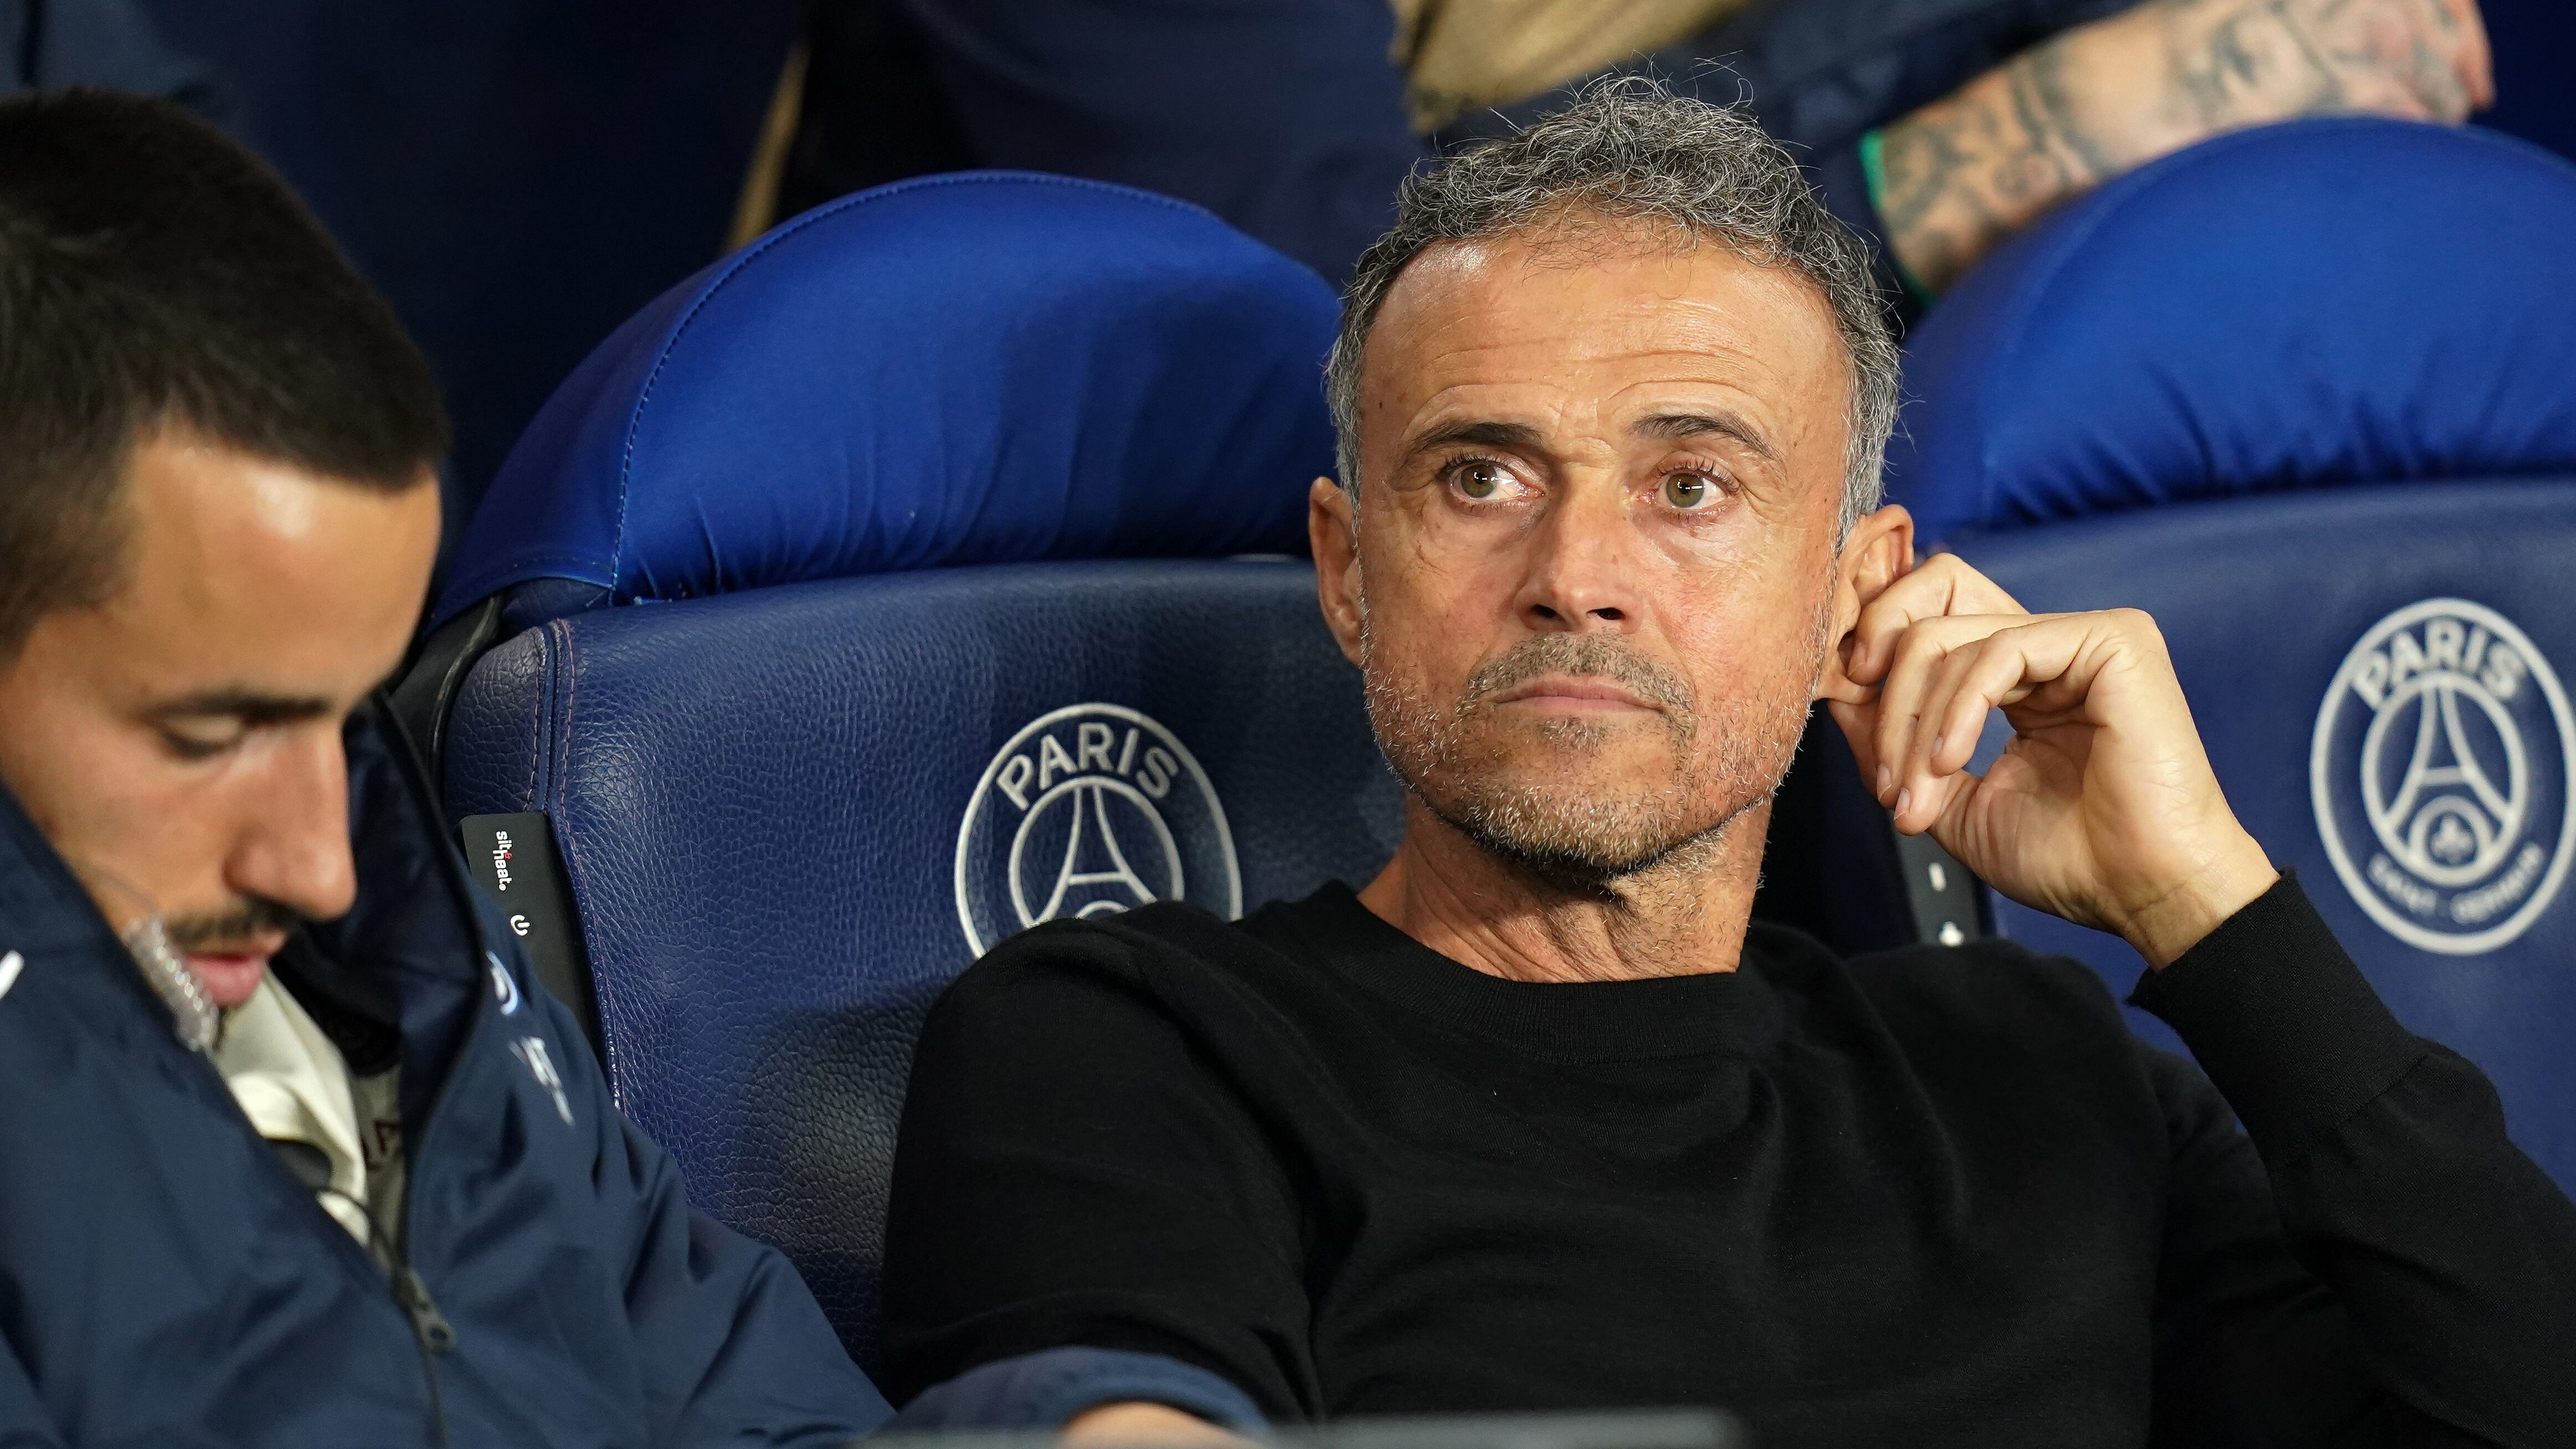 Luis Enrique’s Paris St Germain secured the Ligue 1 title at the weekend before turning attention to the Champions League semi-finals